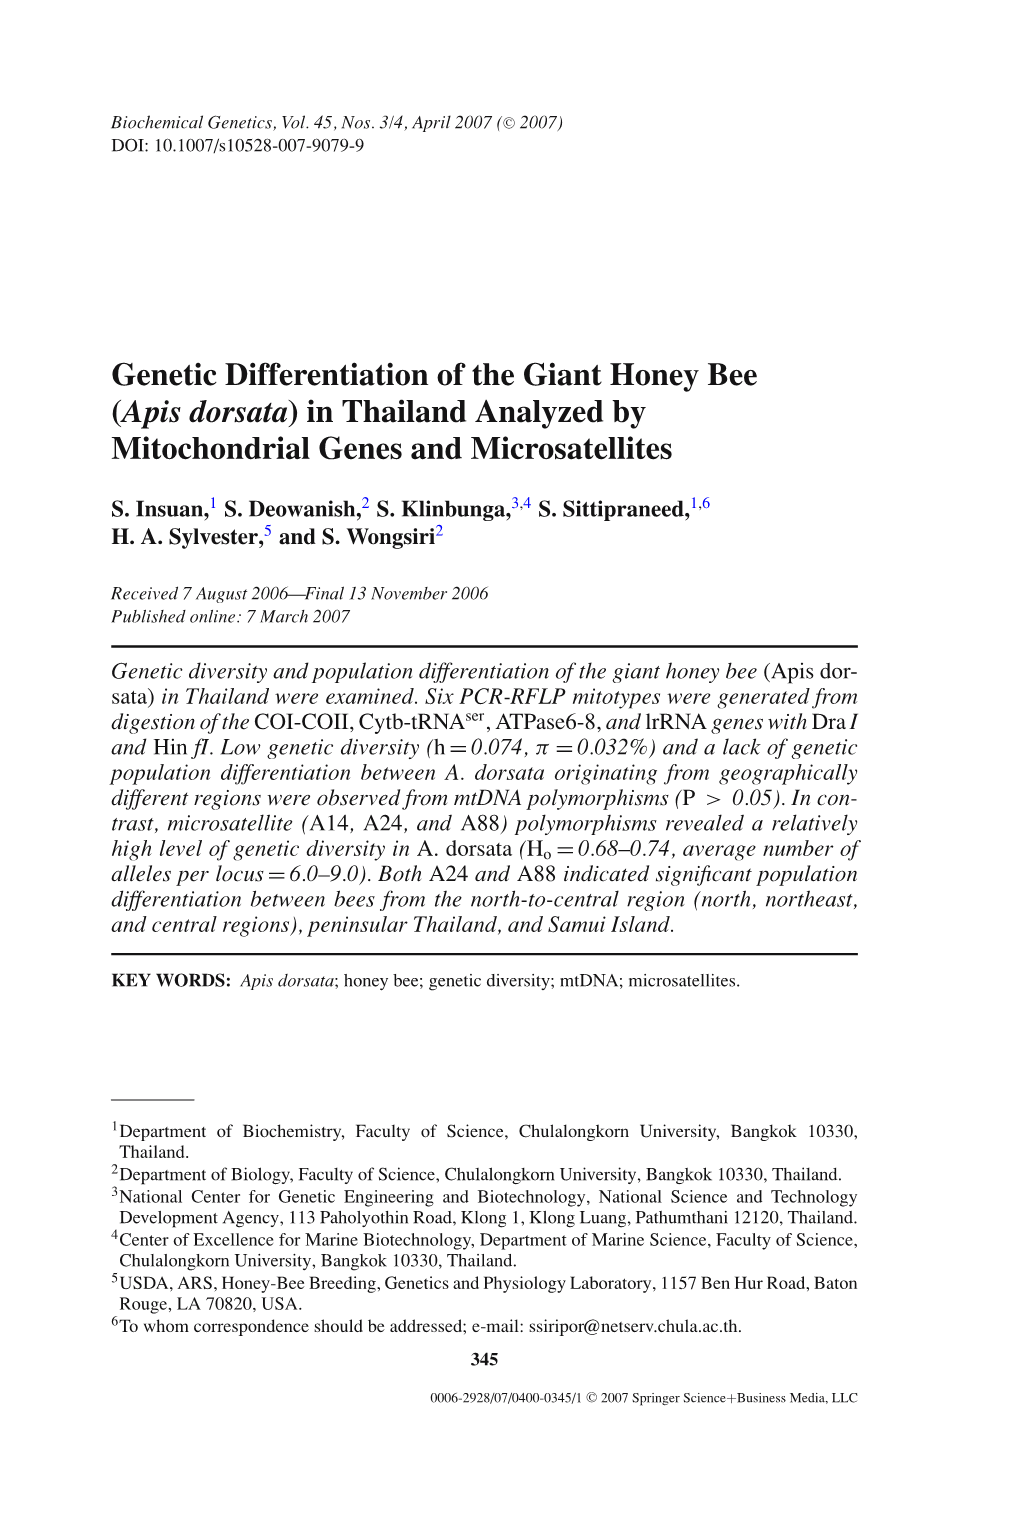 Genetic Differentiation of the Giant Honey Bee (Apis Dorsata) in Thailand Analyzed by Mitochondrial Genes and Microsatellites